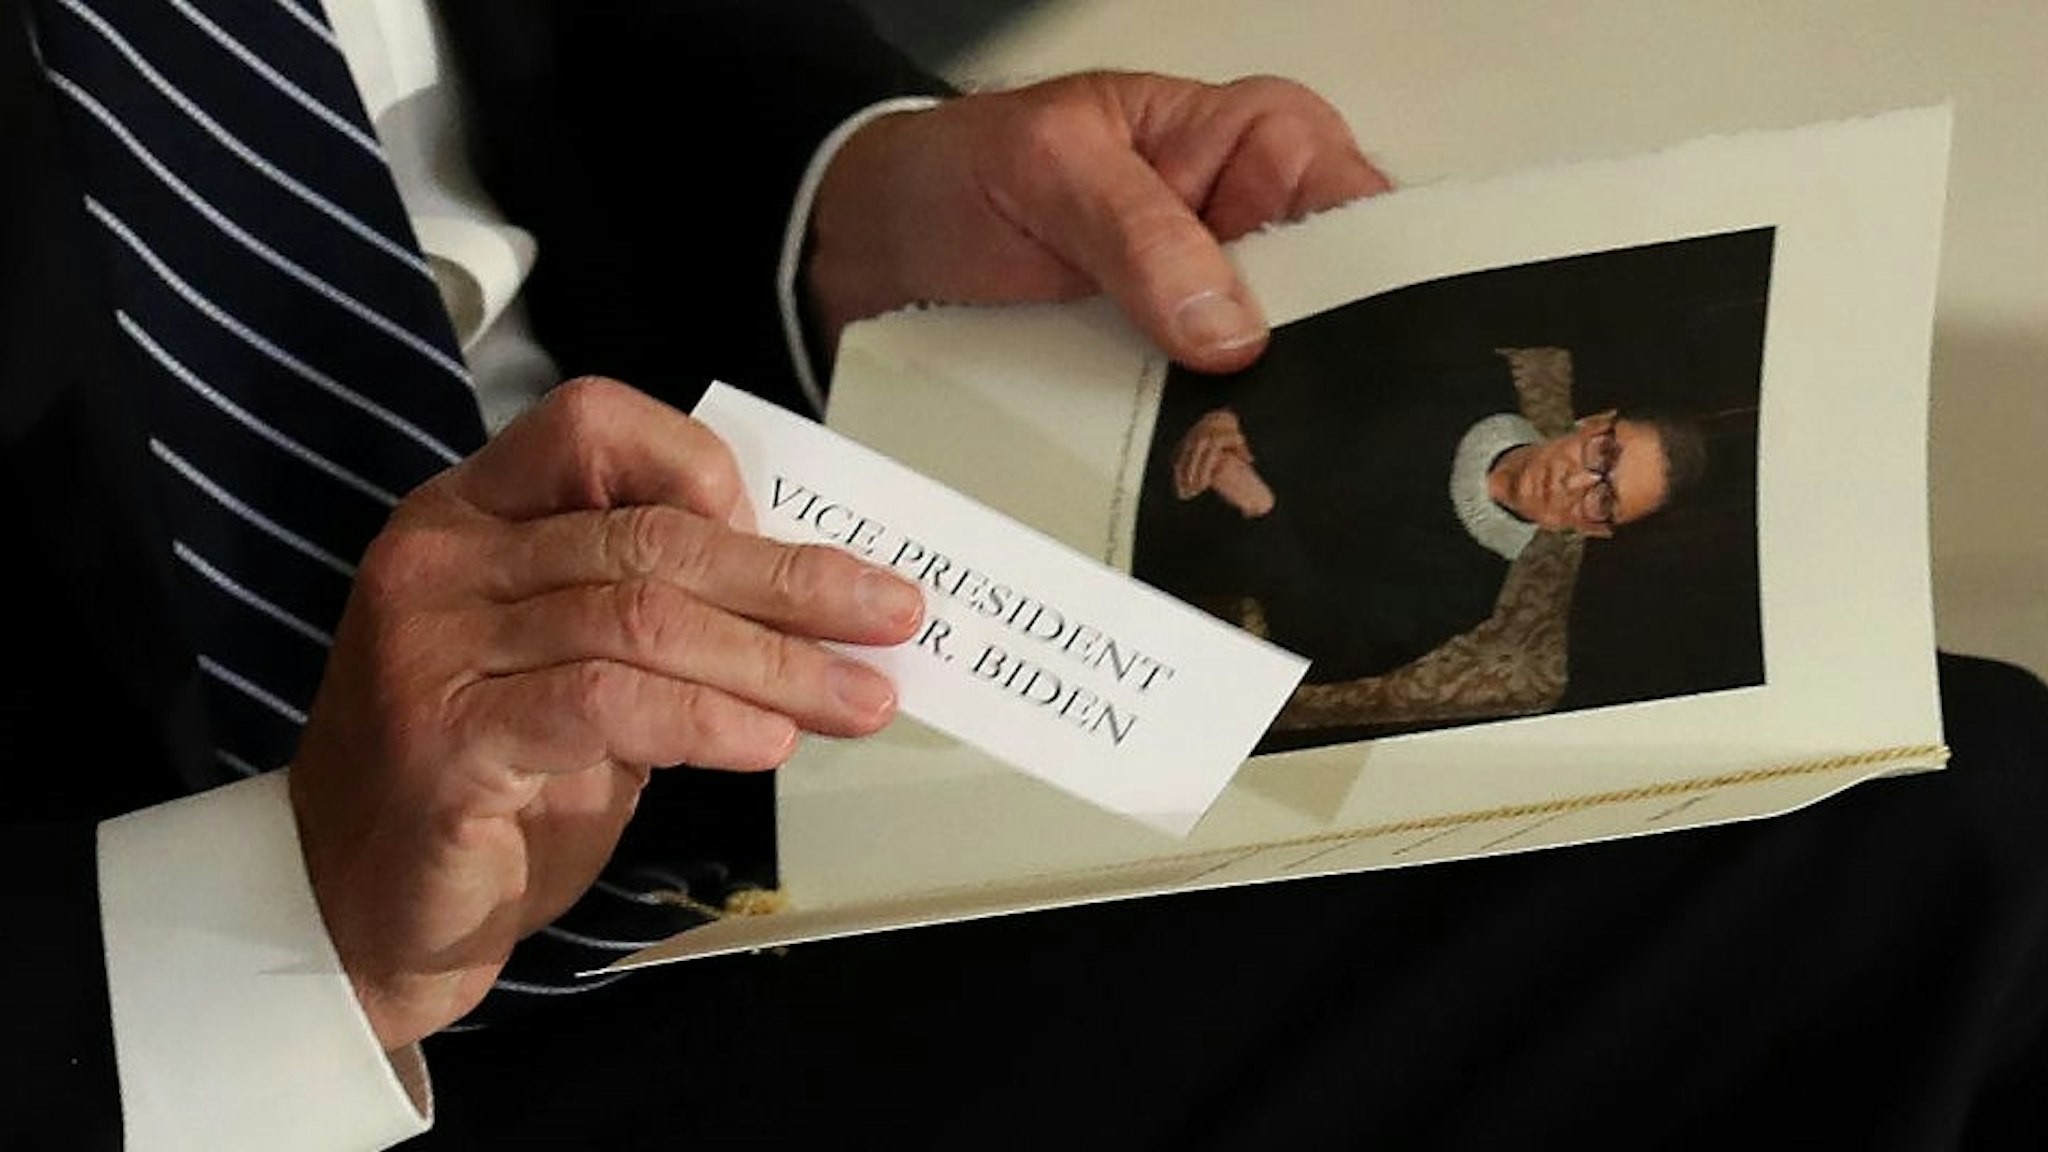 Former Vice President and Democratic presidential nominee Joe Biden puts his name tag into his program during a memorial for the late Associate Justice Ruth Bader Ginsburg in the Statuary Hall, where she lies in state at the US Capitol, September 25, 2020 in Washington, DC. (Photo by Chip Somodevilla / POOL / AFP) (Photo by